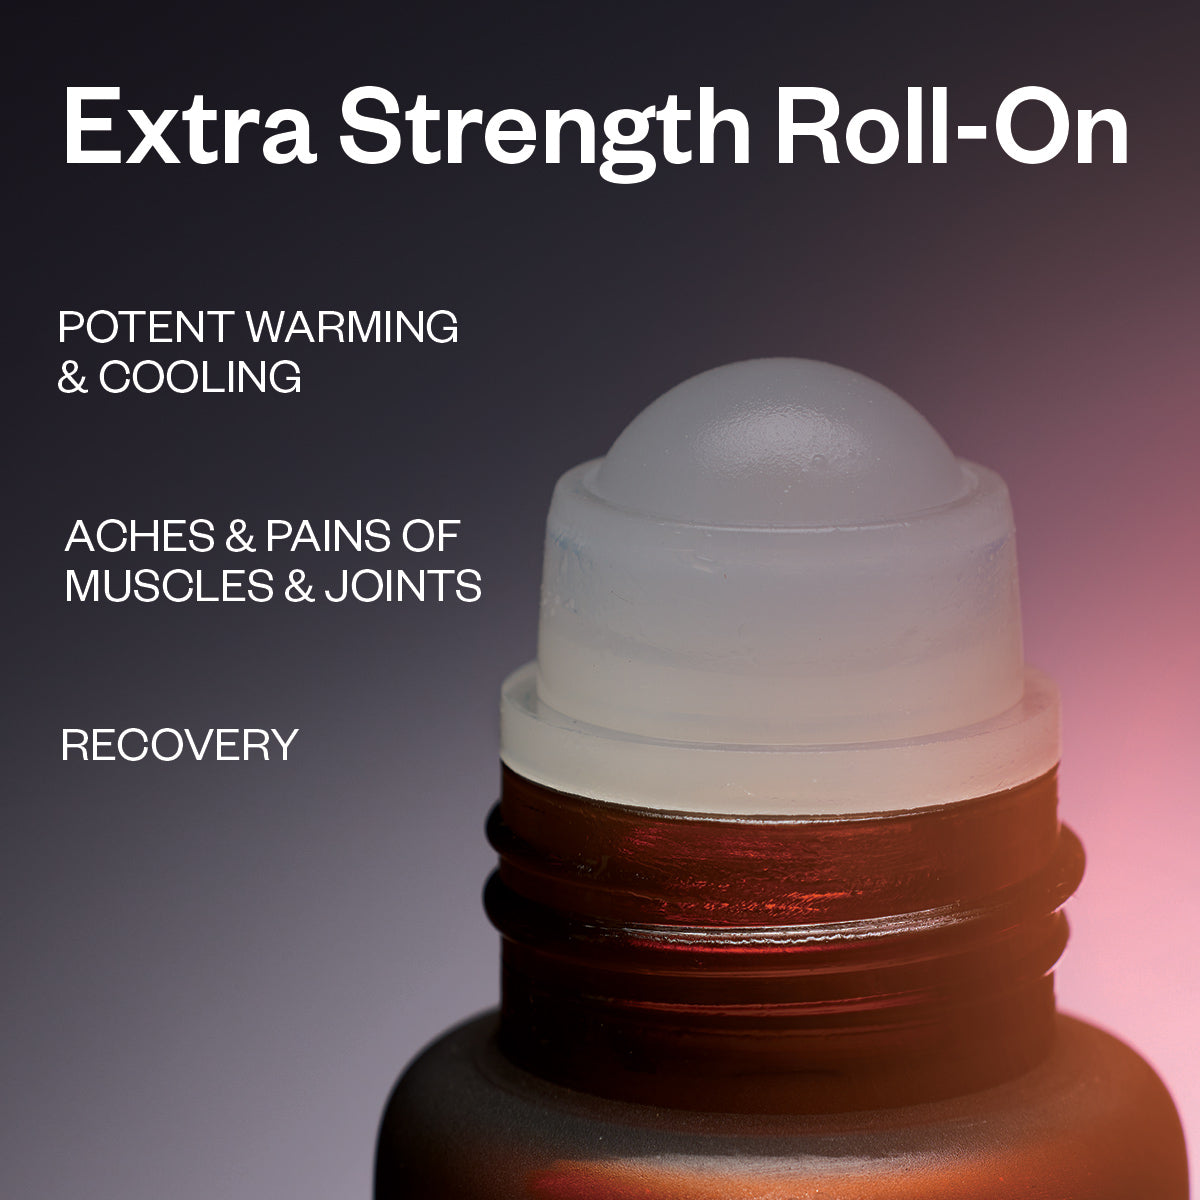 Extra Strength Pain Relieving Remedy Roll-On - Saje Natural Wellness